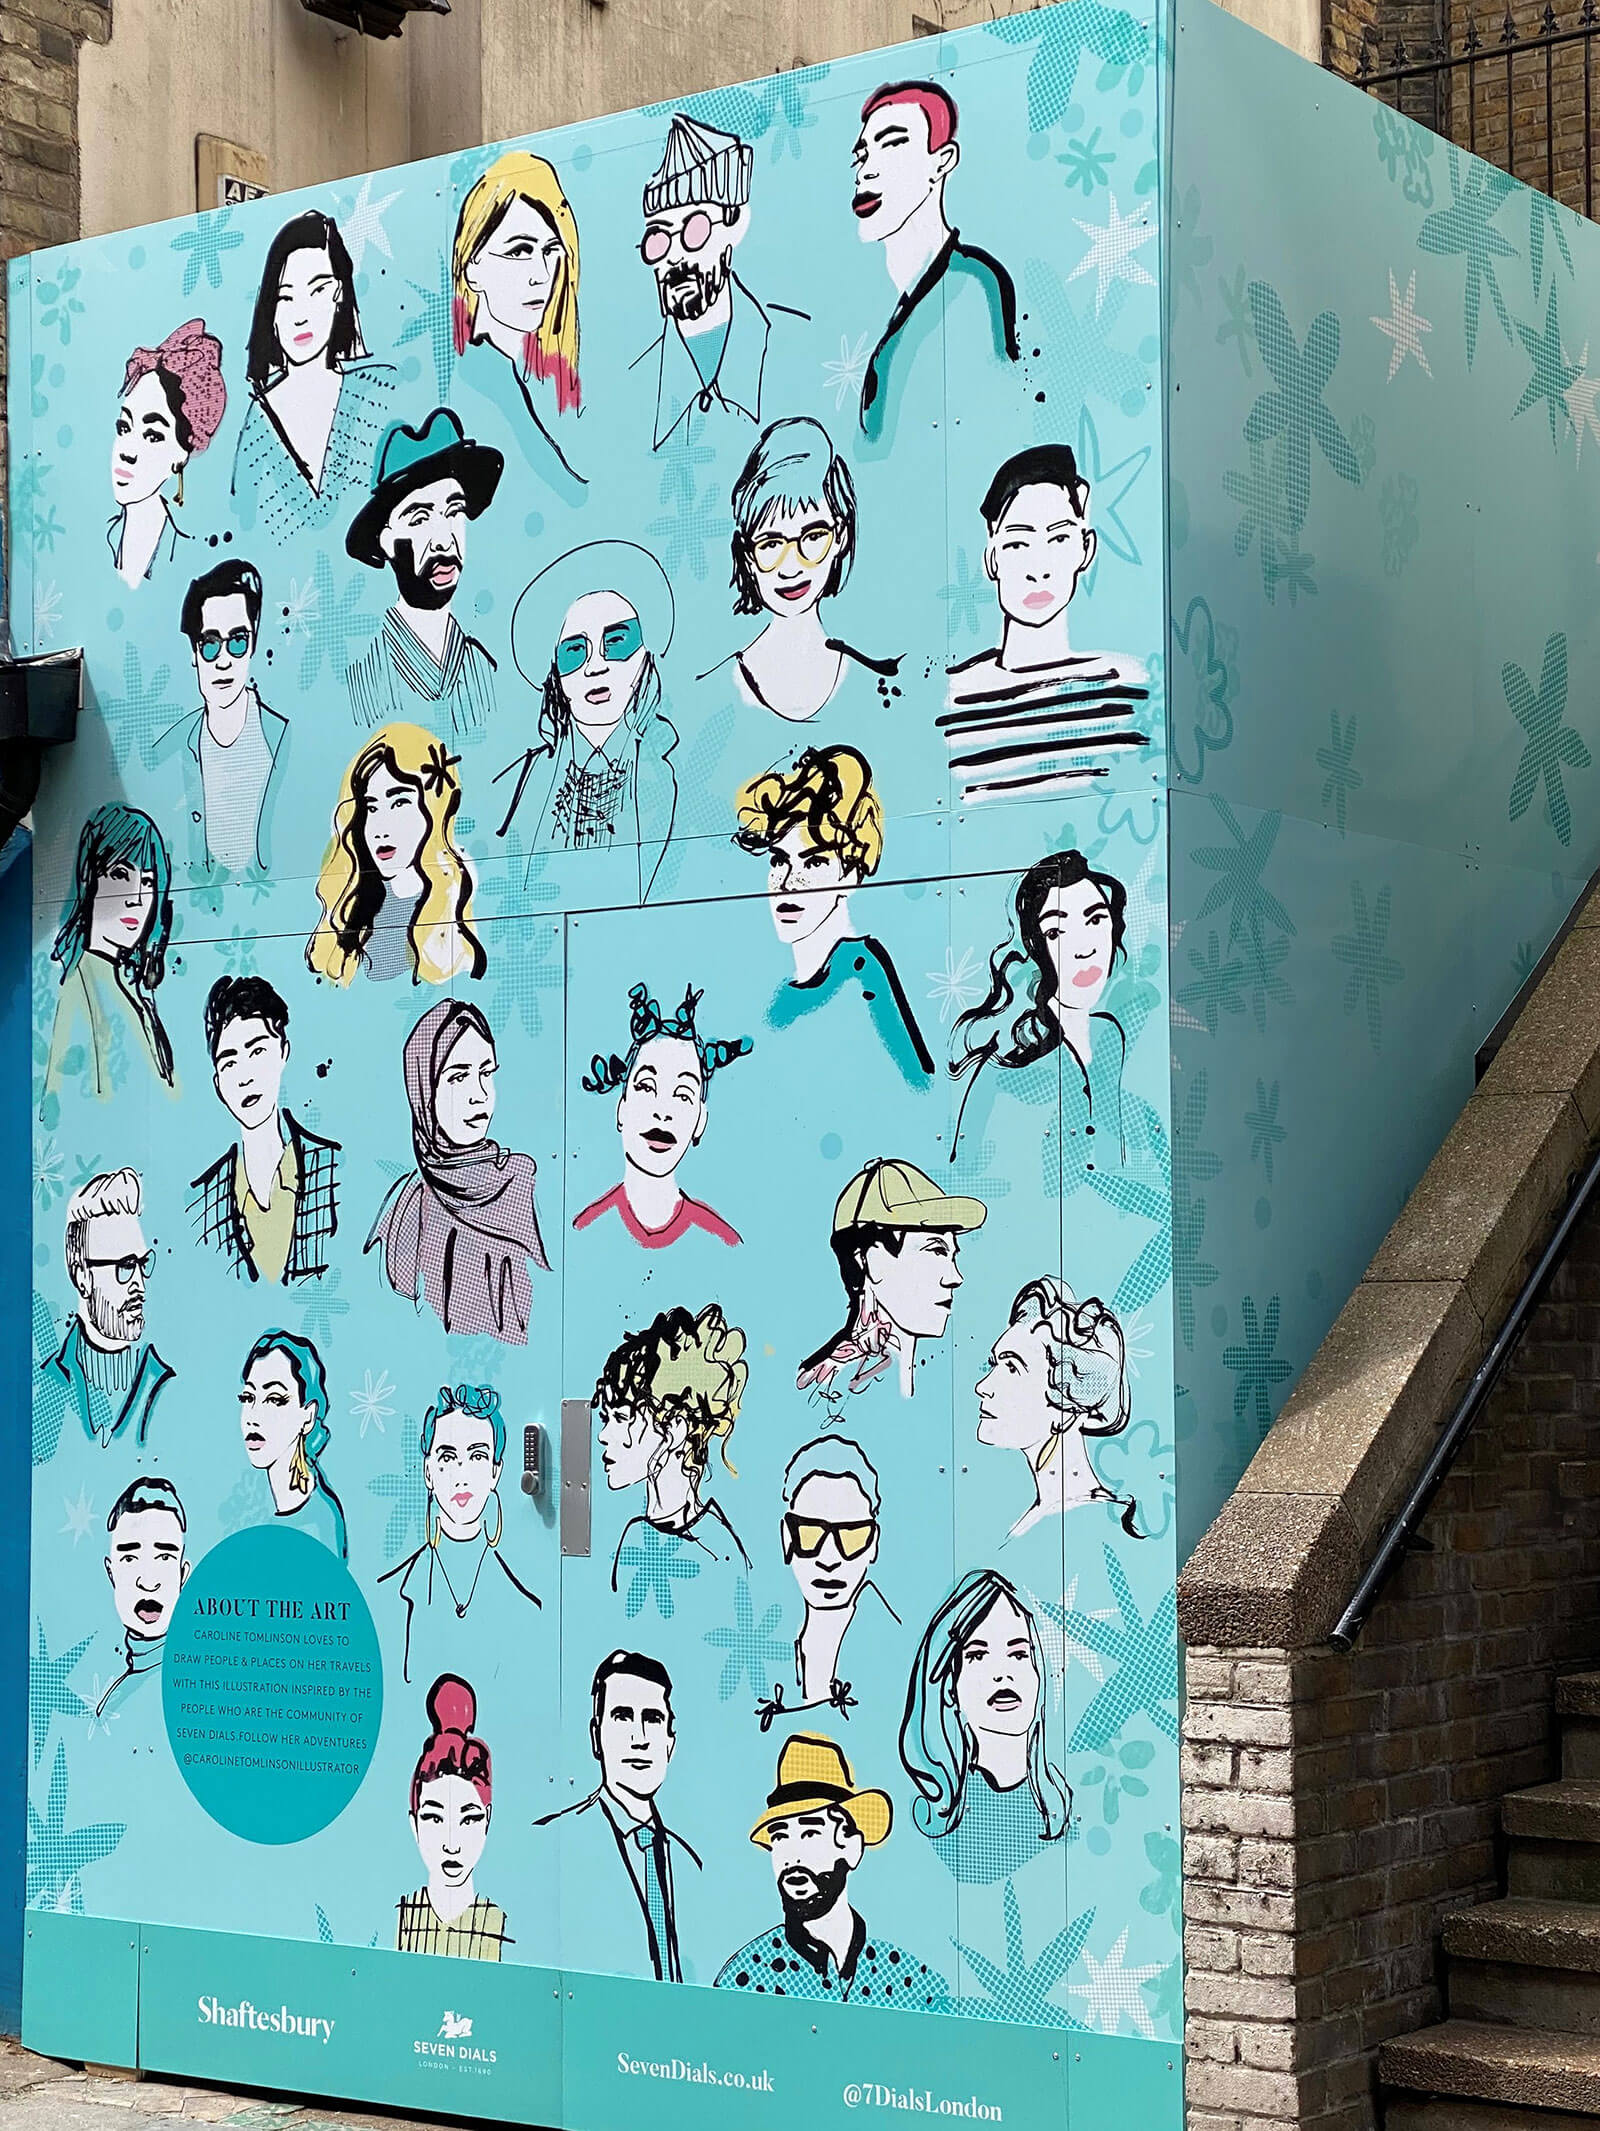 People – The People of Covent Garden London Illustrated